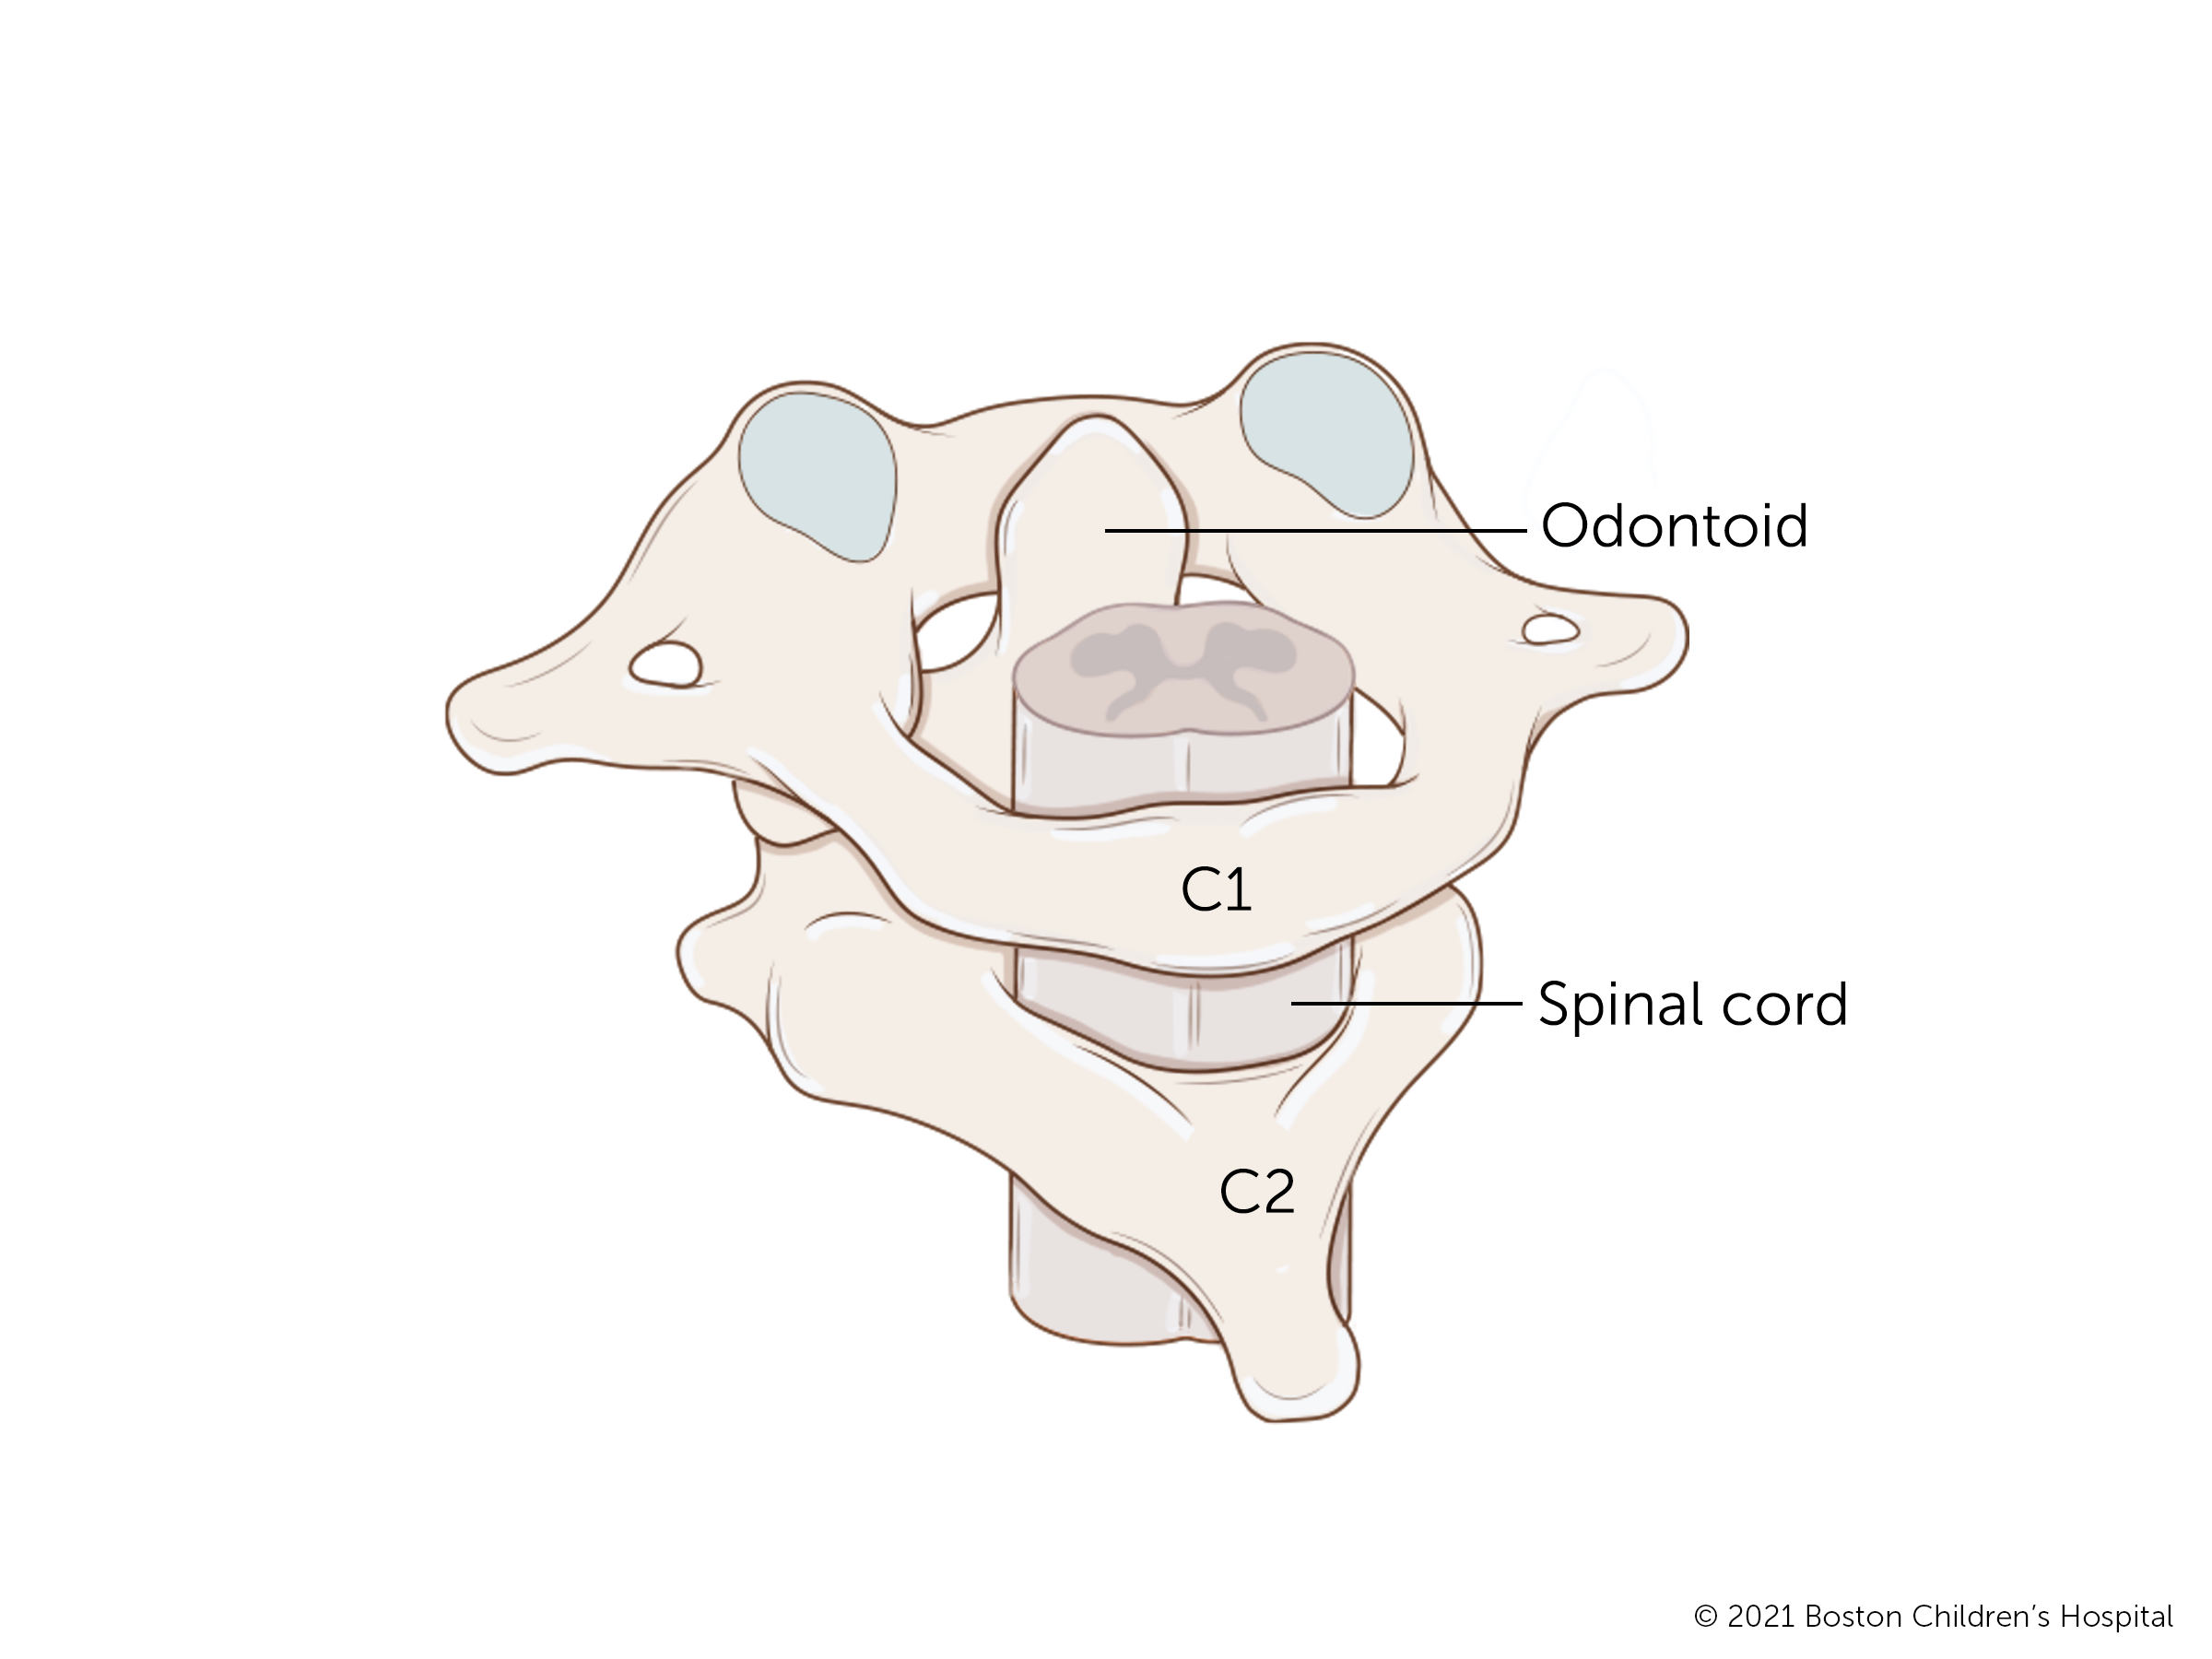 The C1 and C2 vertebrae at the top of the spine are connected by a nob called the odontoid process.